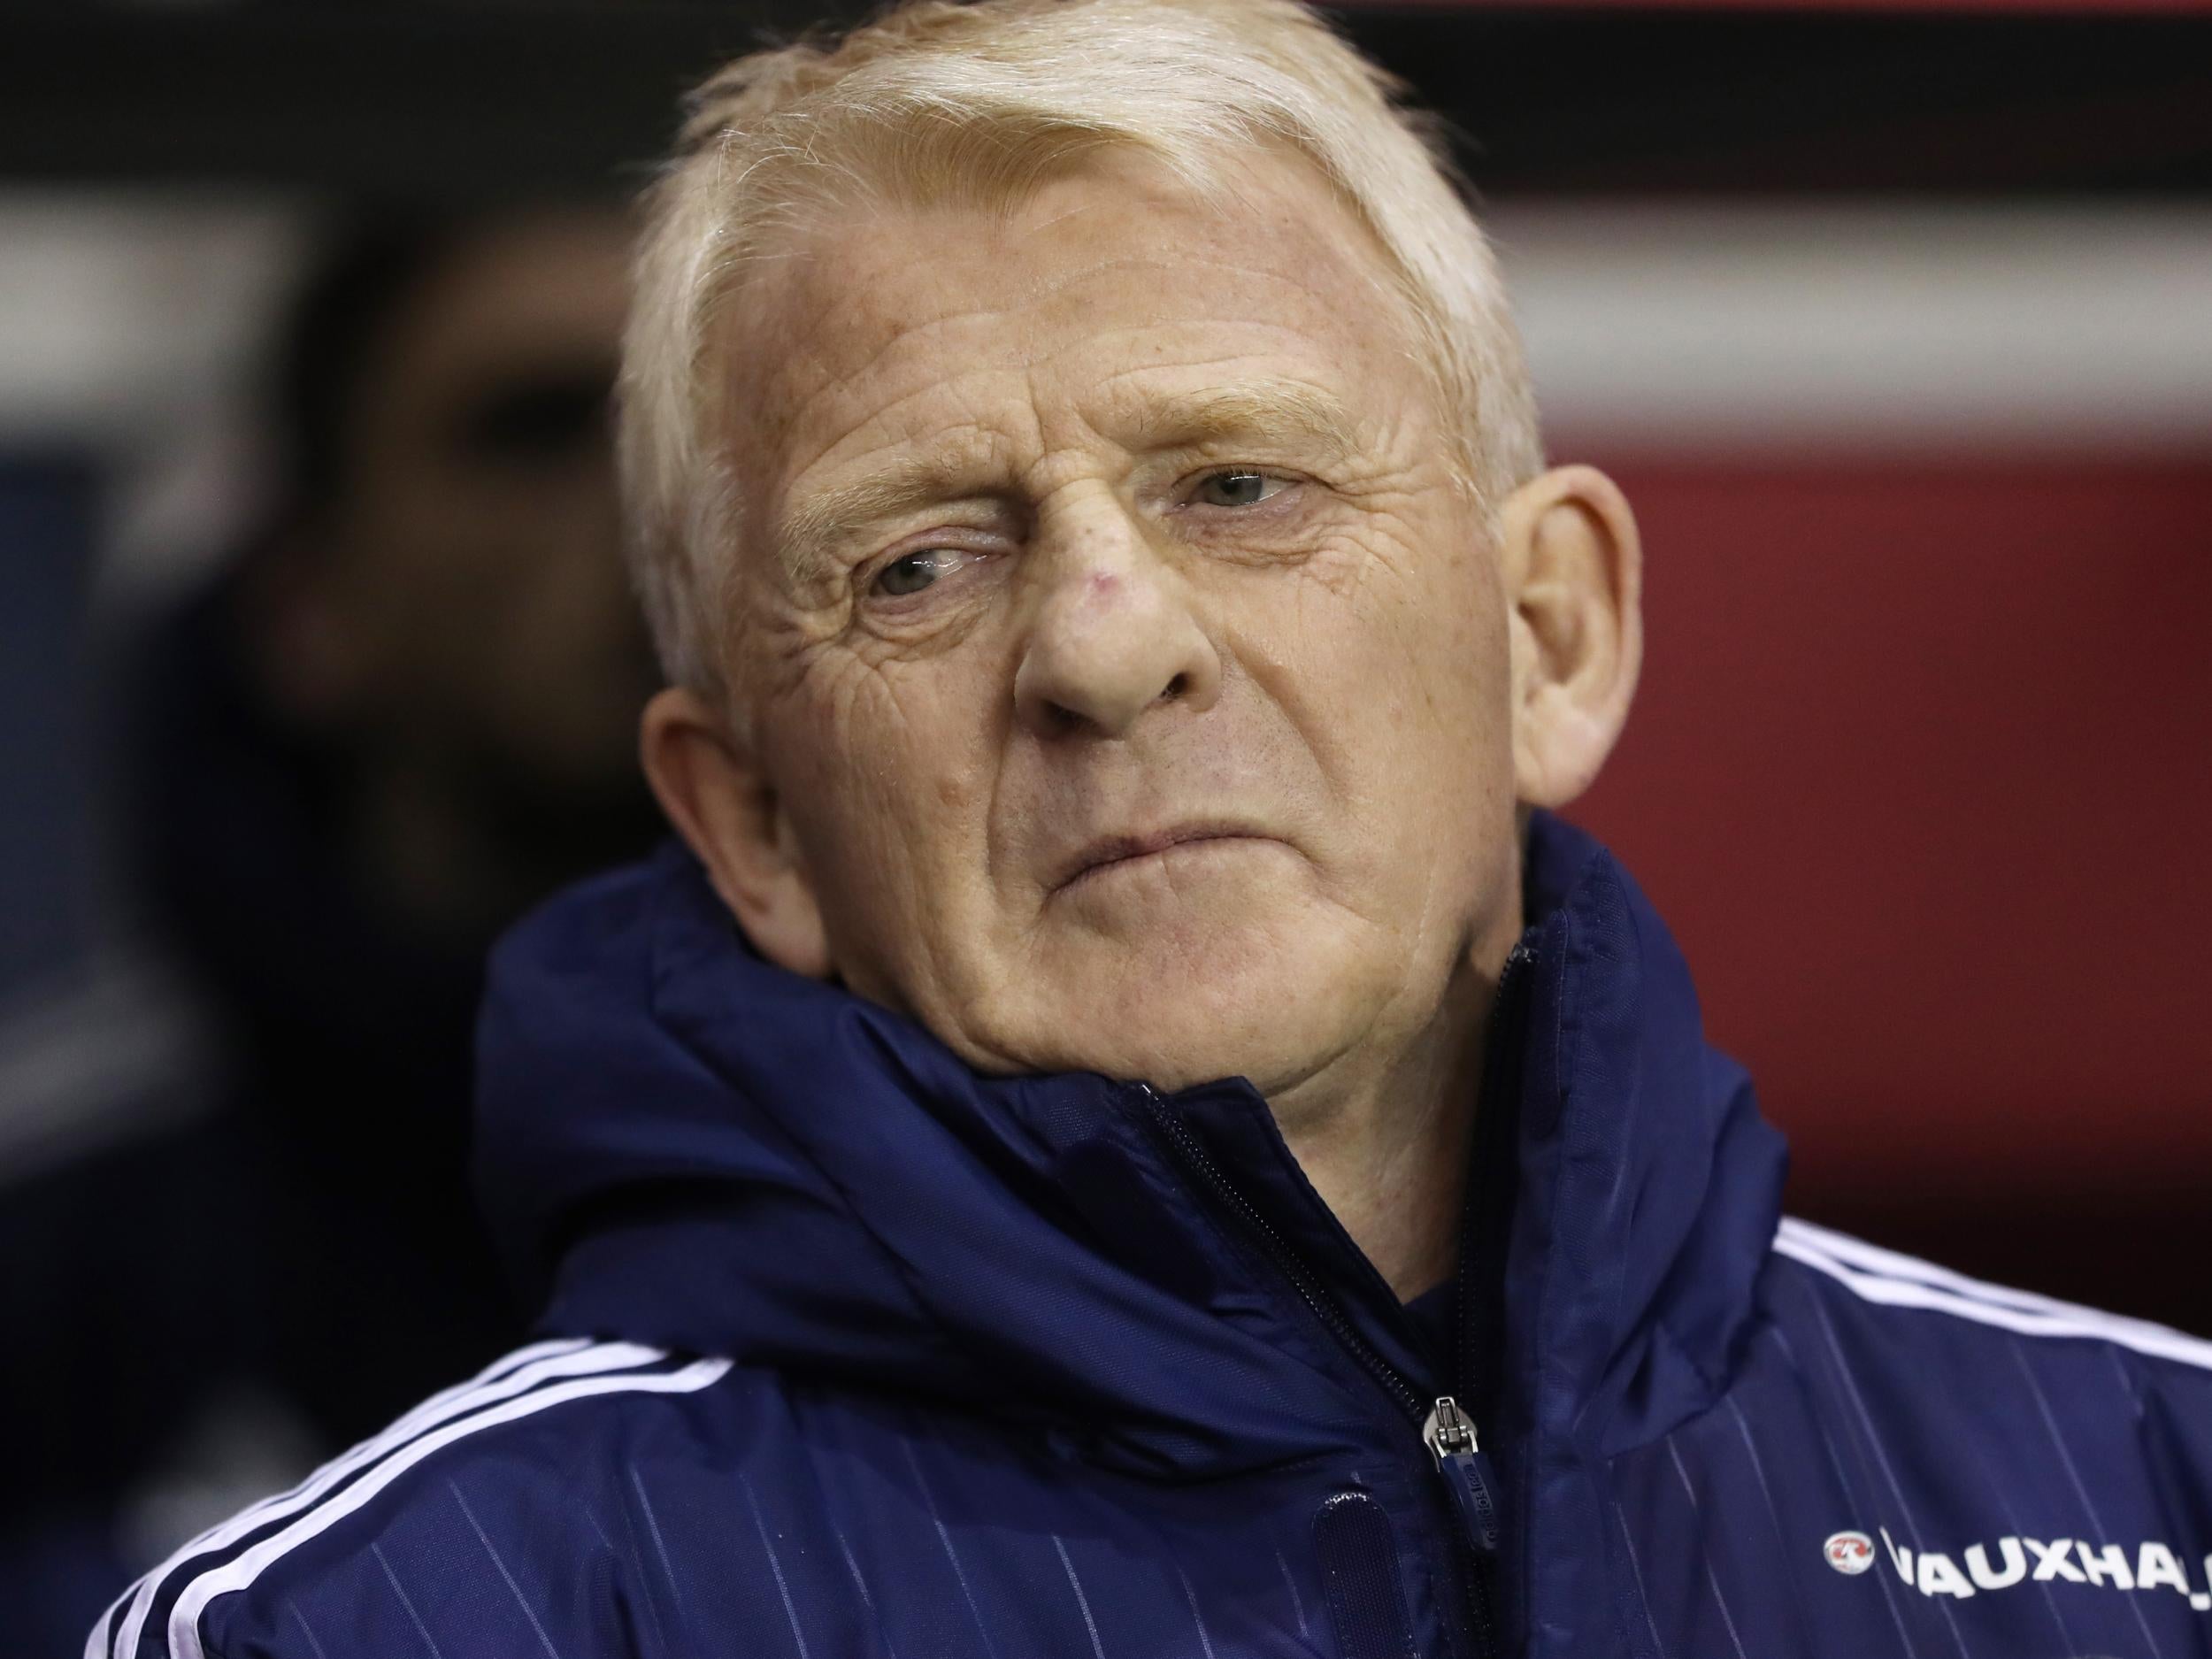 Strachan's side were unable to find a late winner